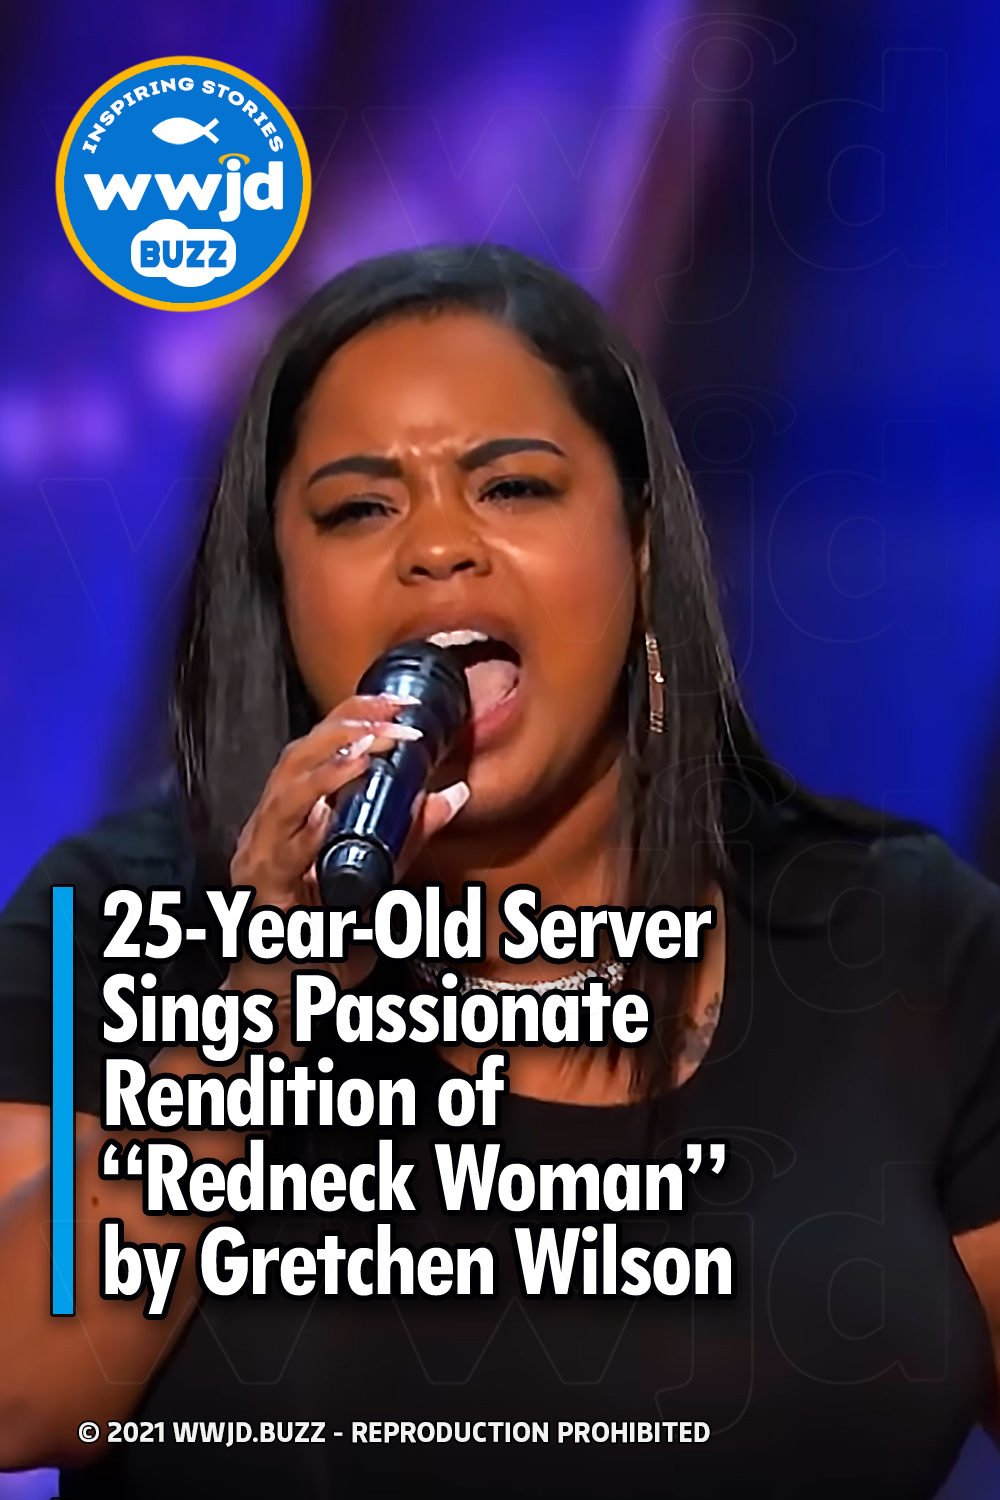 25-Year-Old Server Sings Passionate Rendition of “Redneck Woman” by Gretchen Wilson